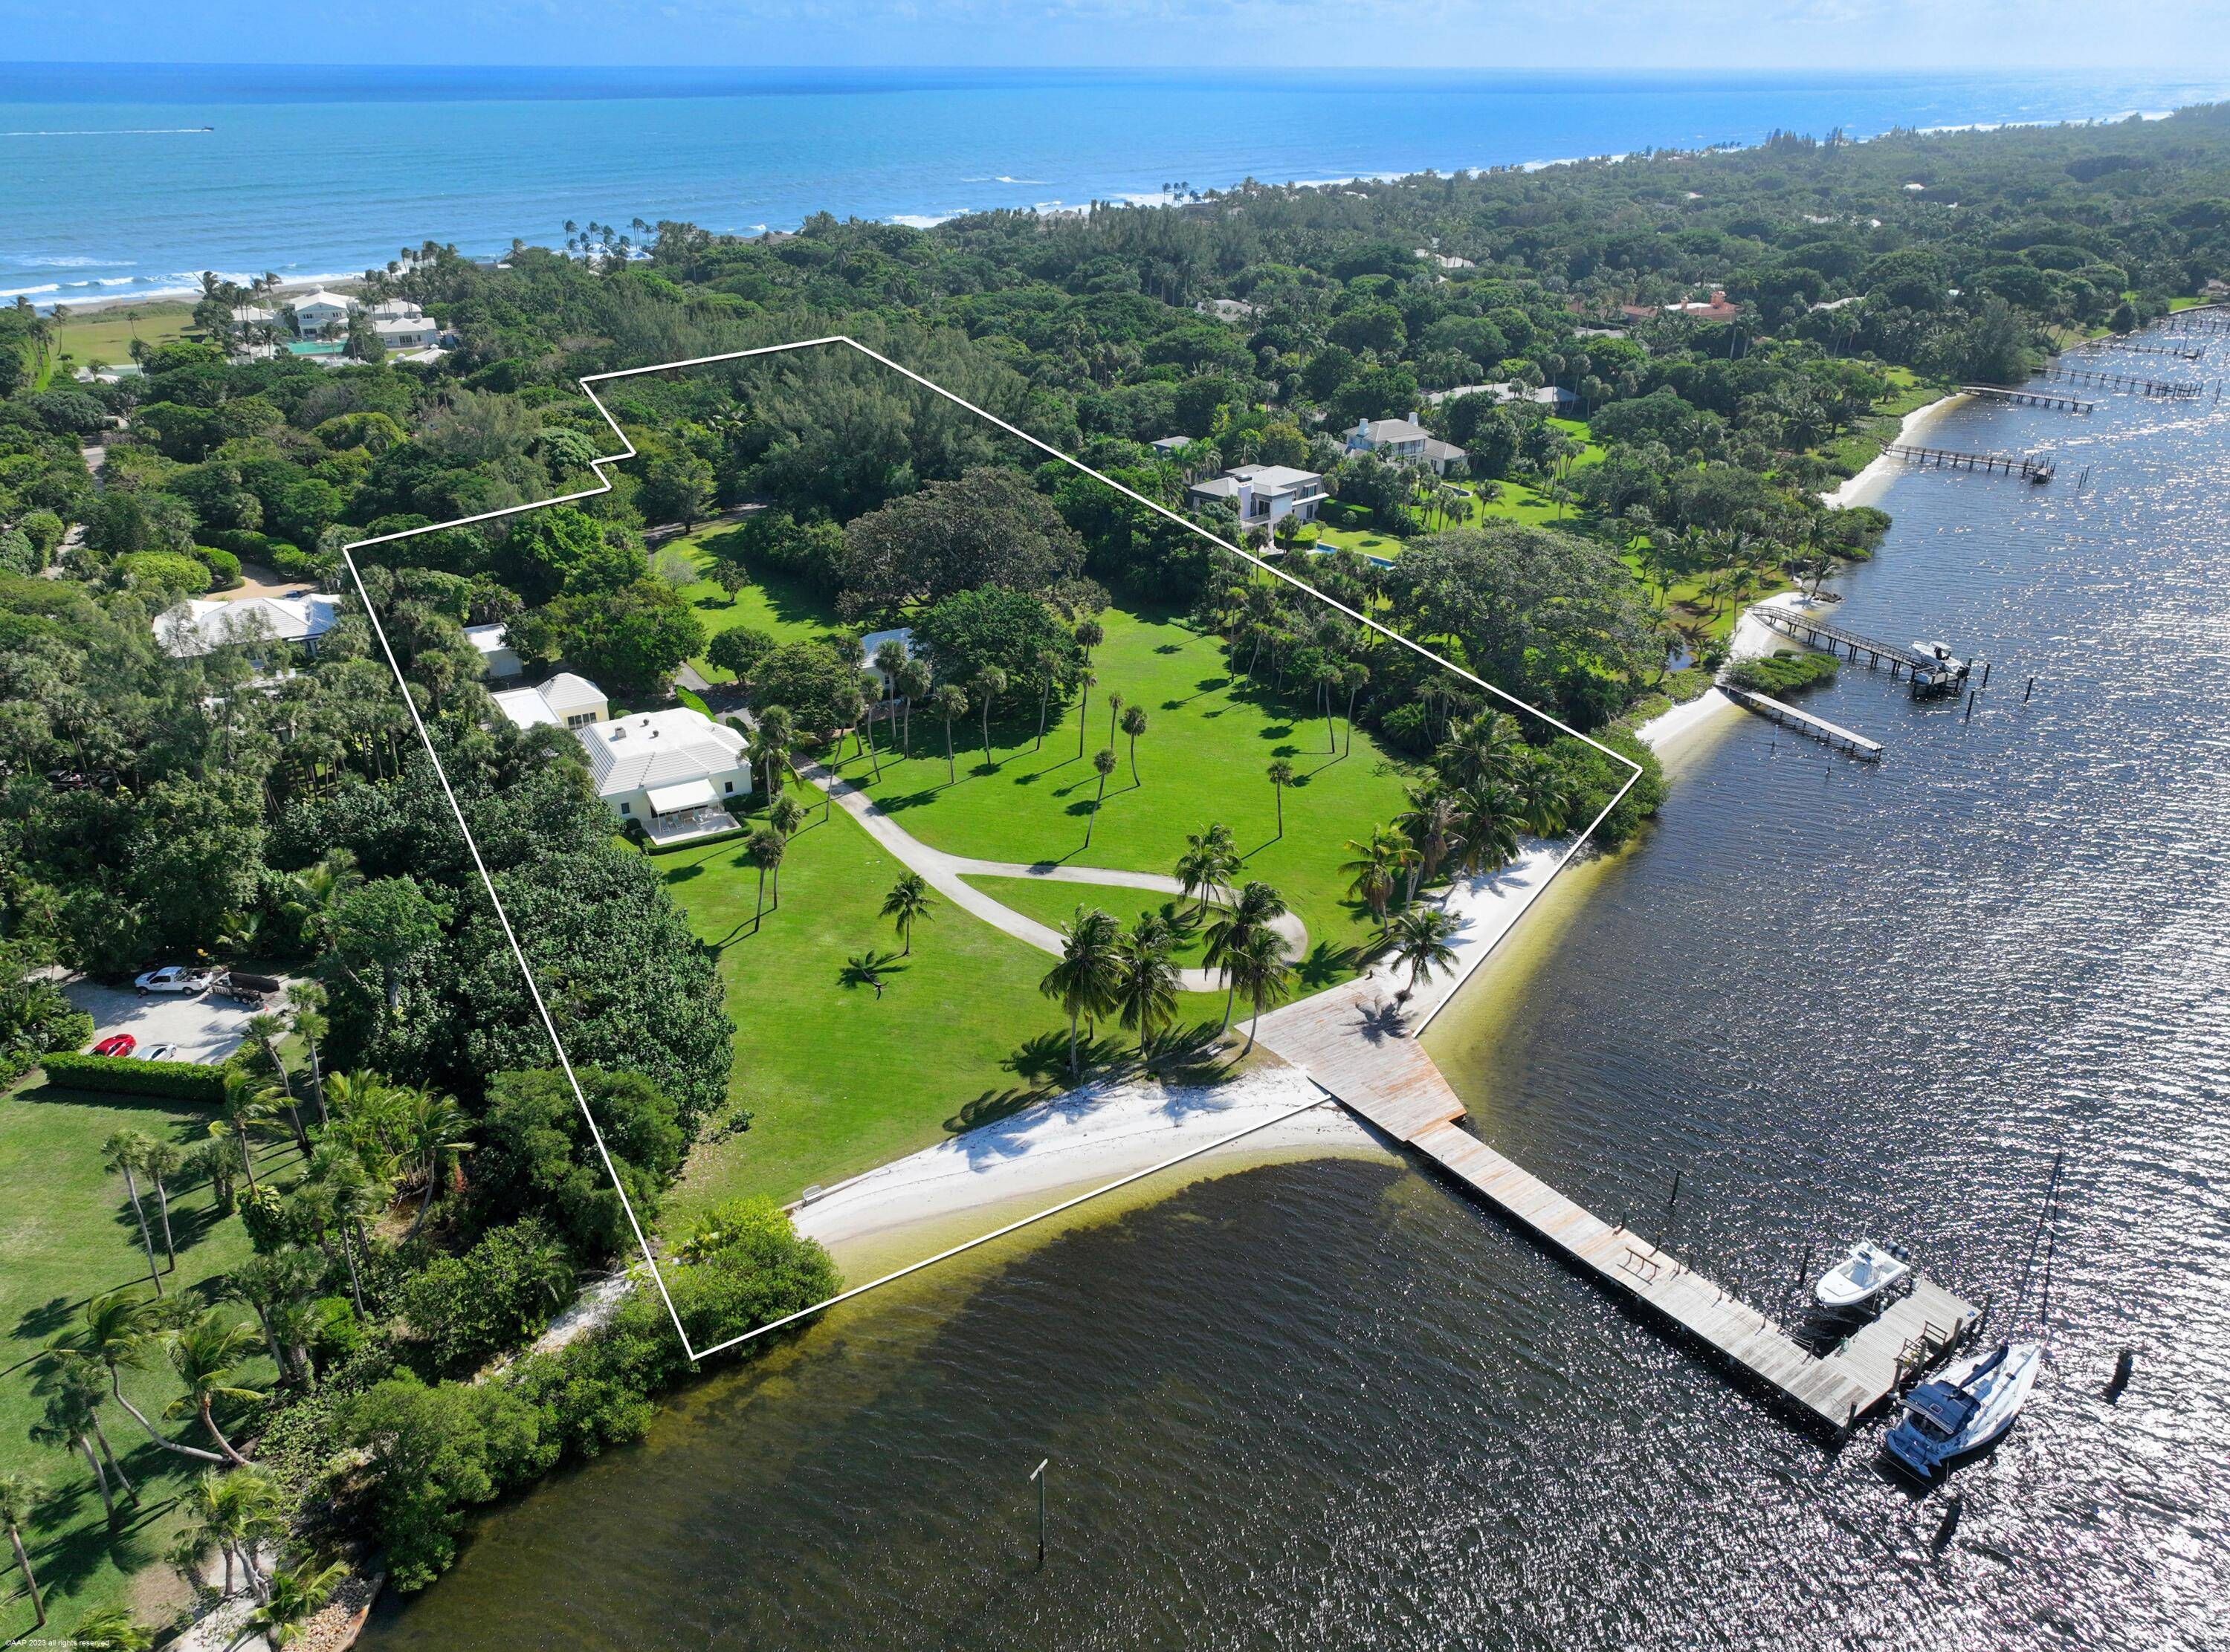 This is a rare opportunity to own one of the premier Intracoastal properties on Jupiter Island.